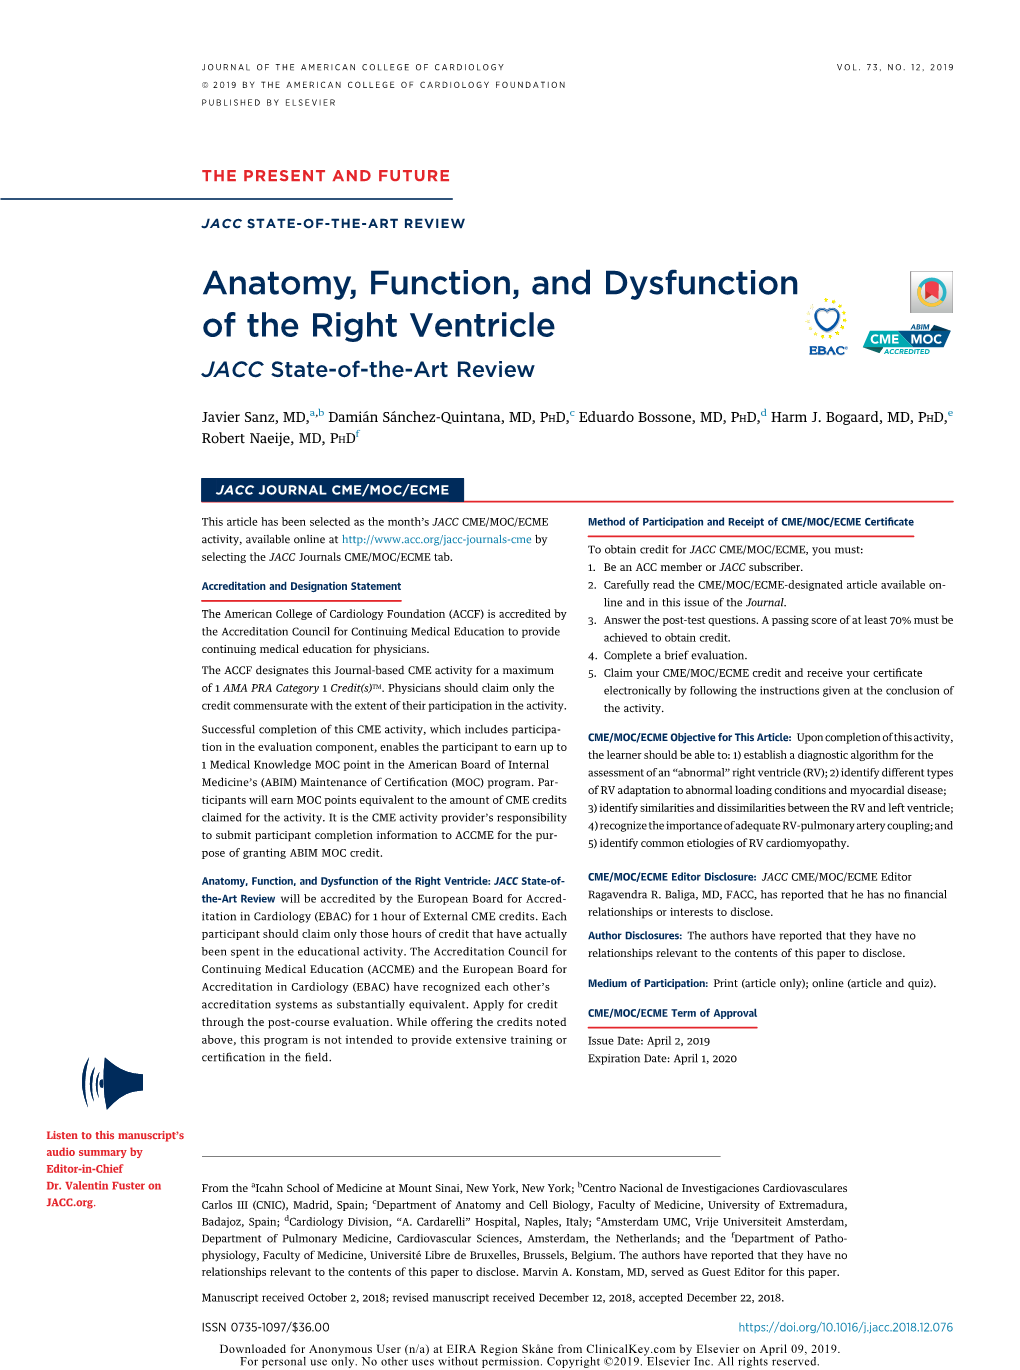 Anatomy, Function, and Dysfunction Of&Nbsp;The Right&Nbsp;Ventricle